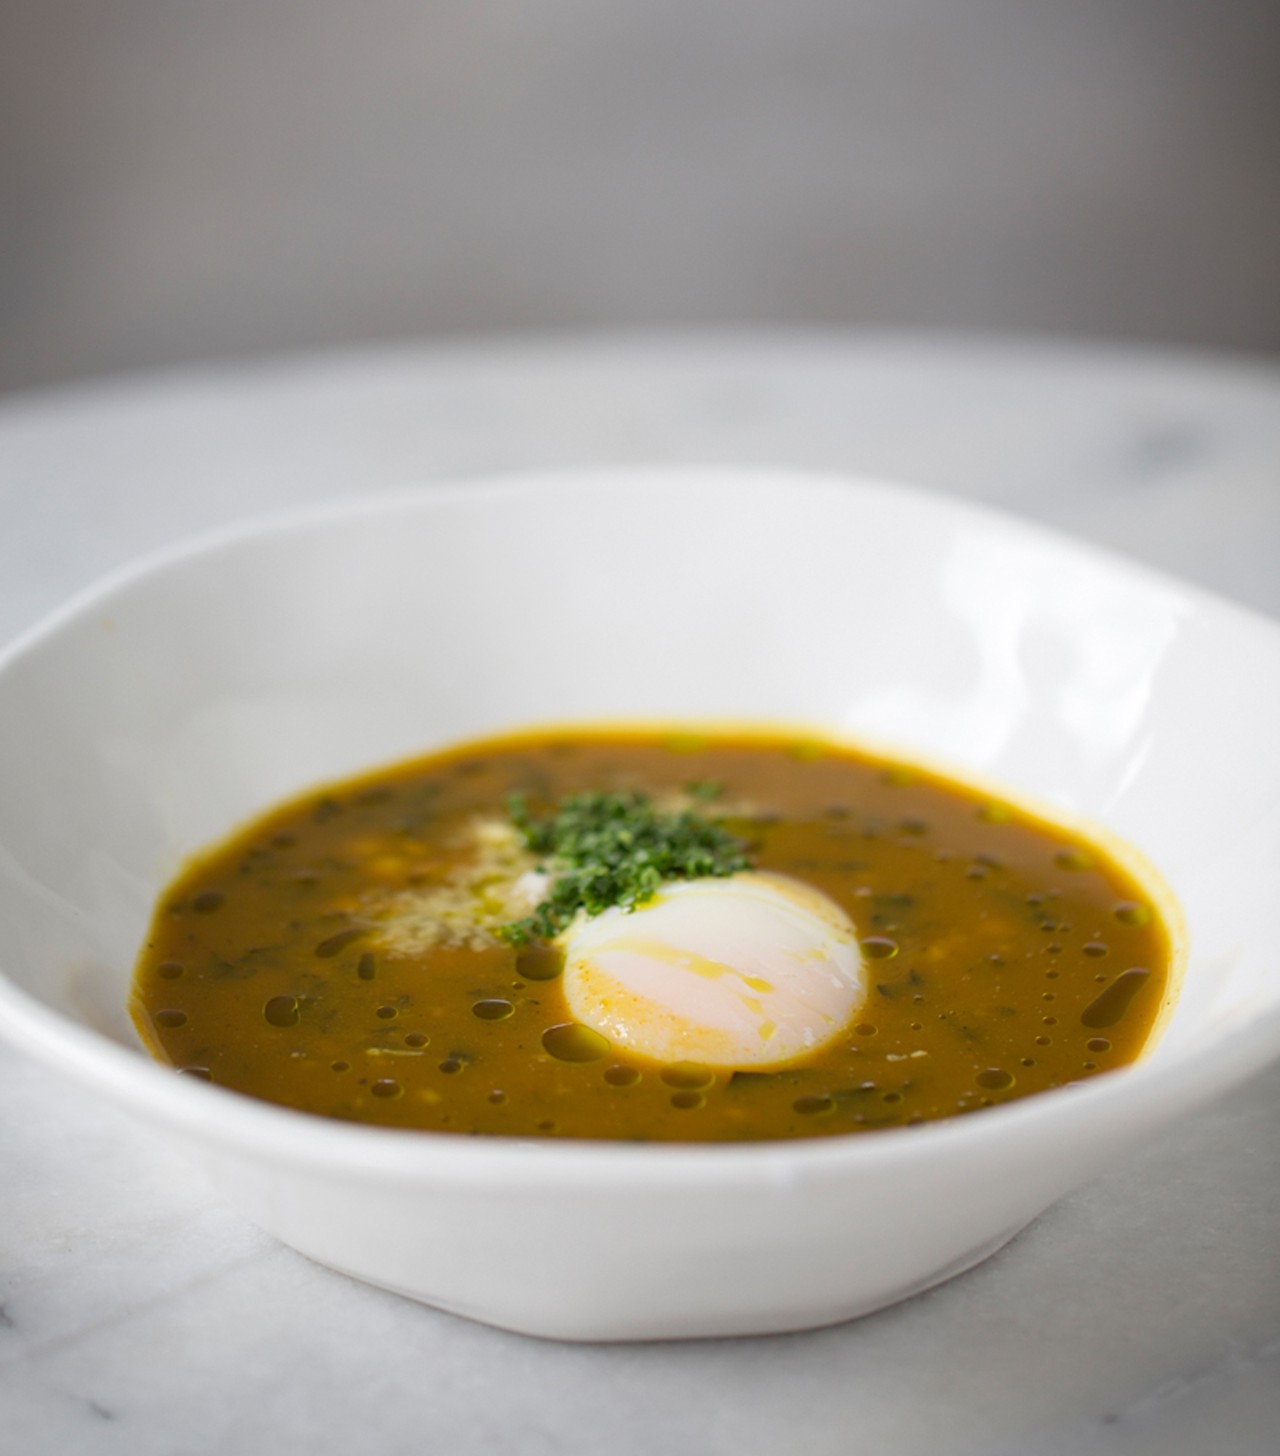 At Olio - The lunch soup with poached egg, pumpkin, farro, and kale.